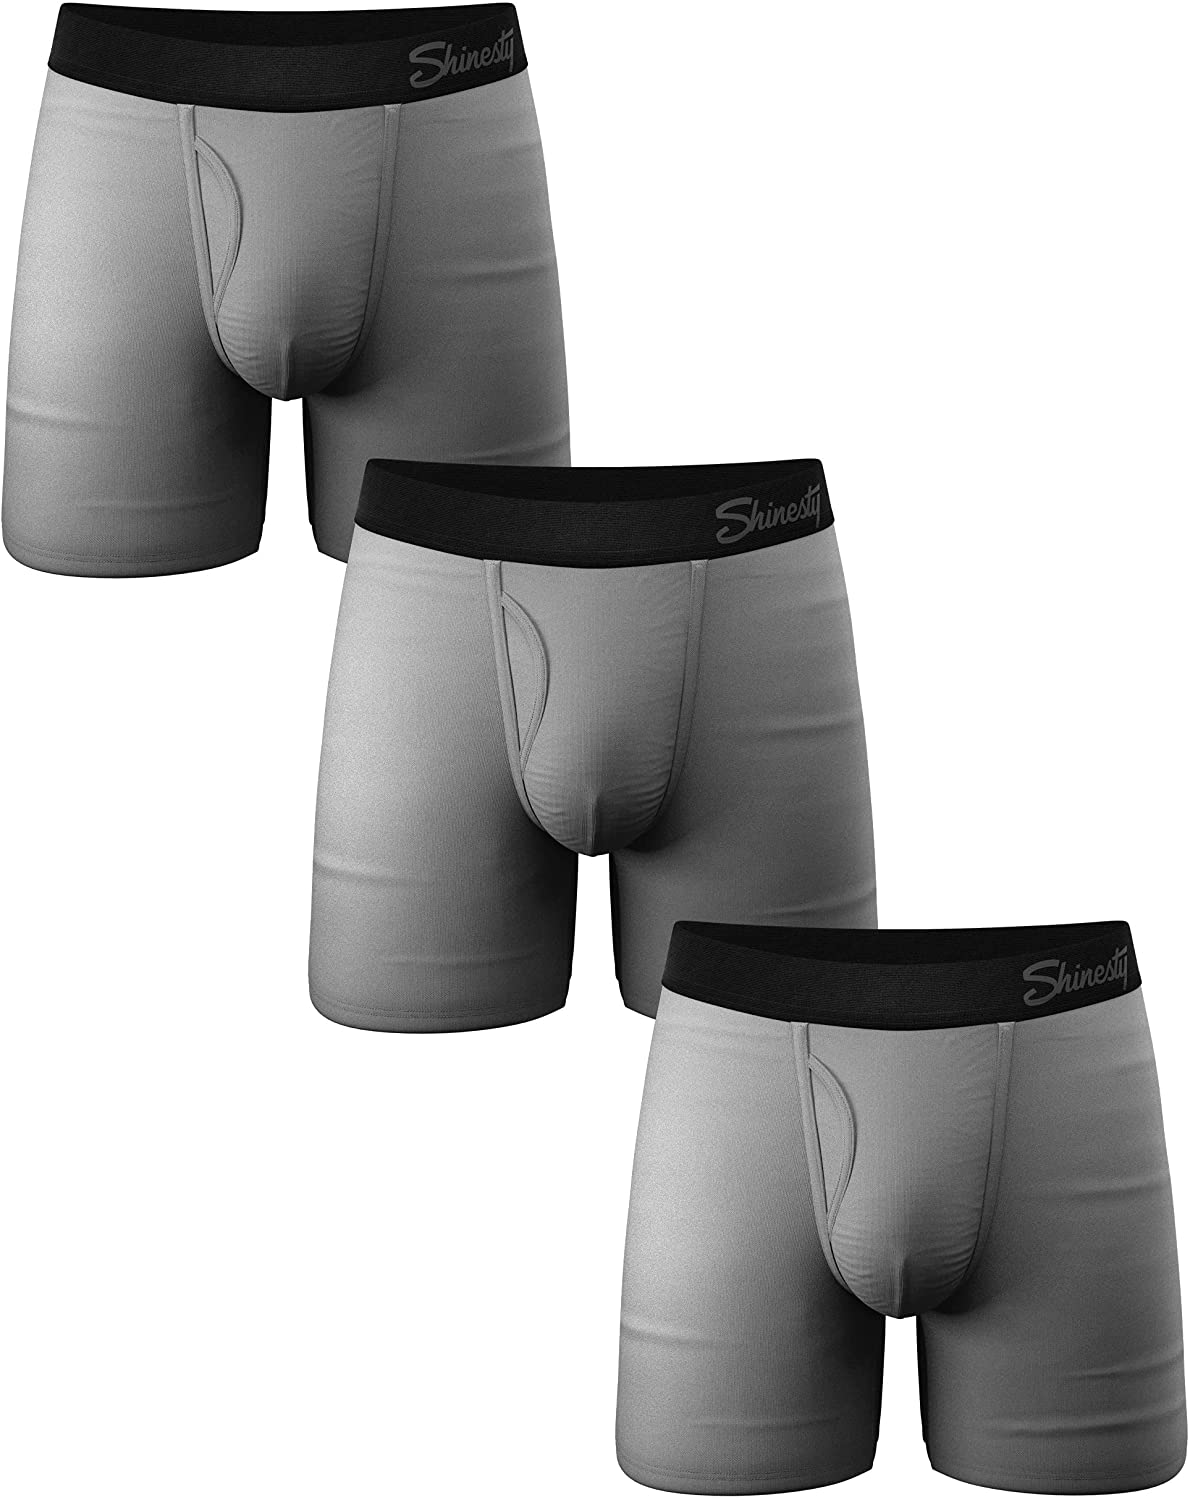 Shinesty Mens Boxer Brief w/ fly 3 Pack - Men's Ball Hammock Pouch